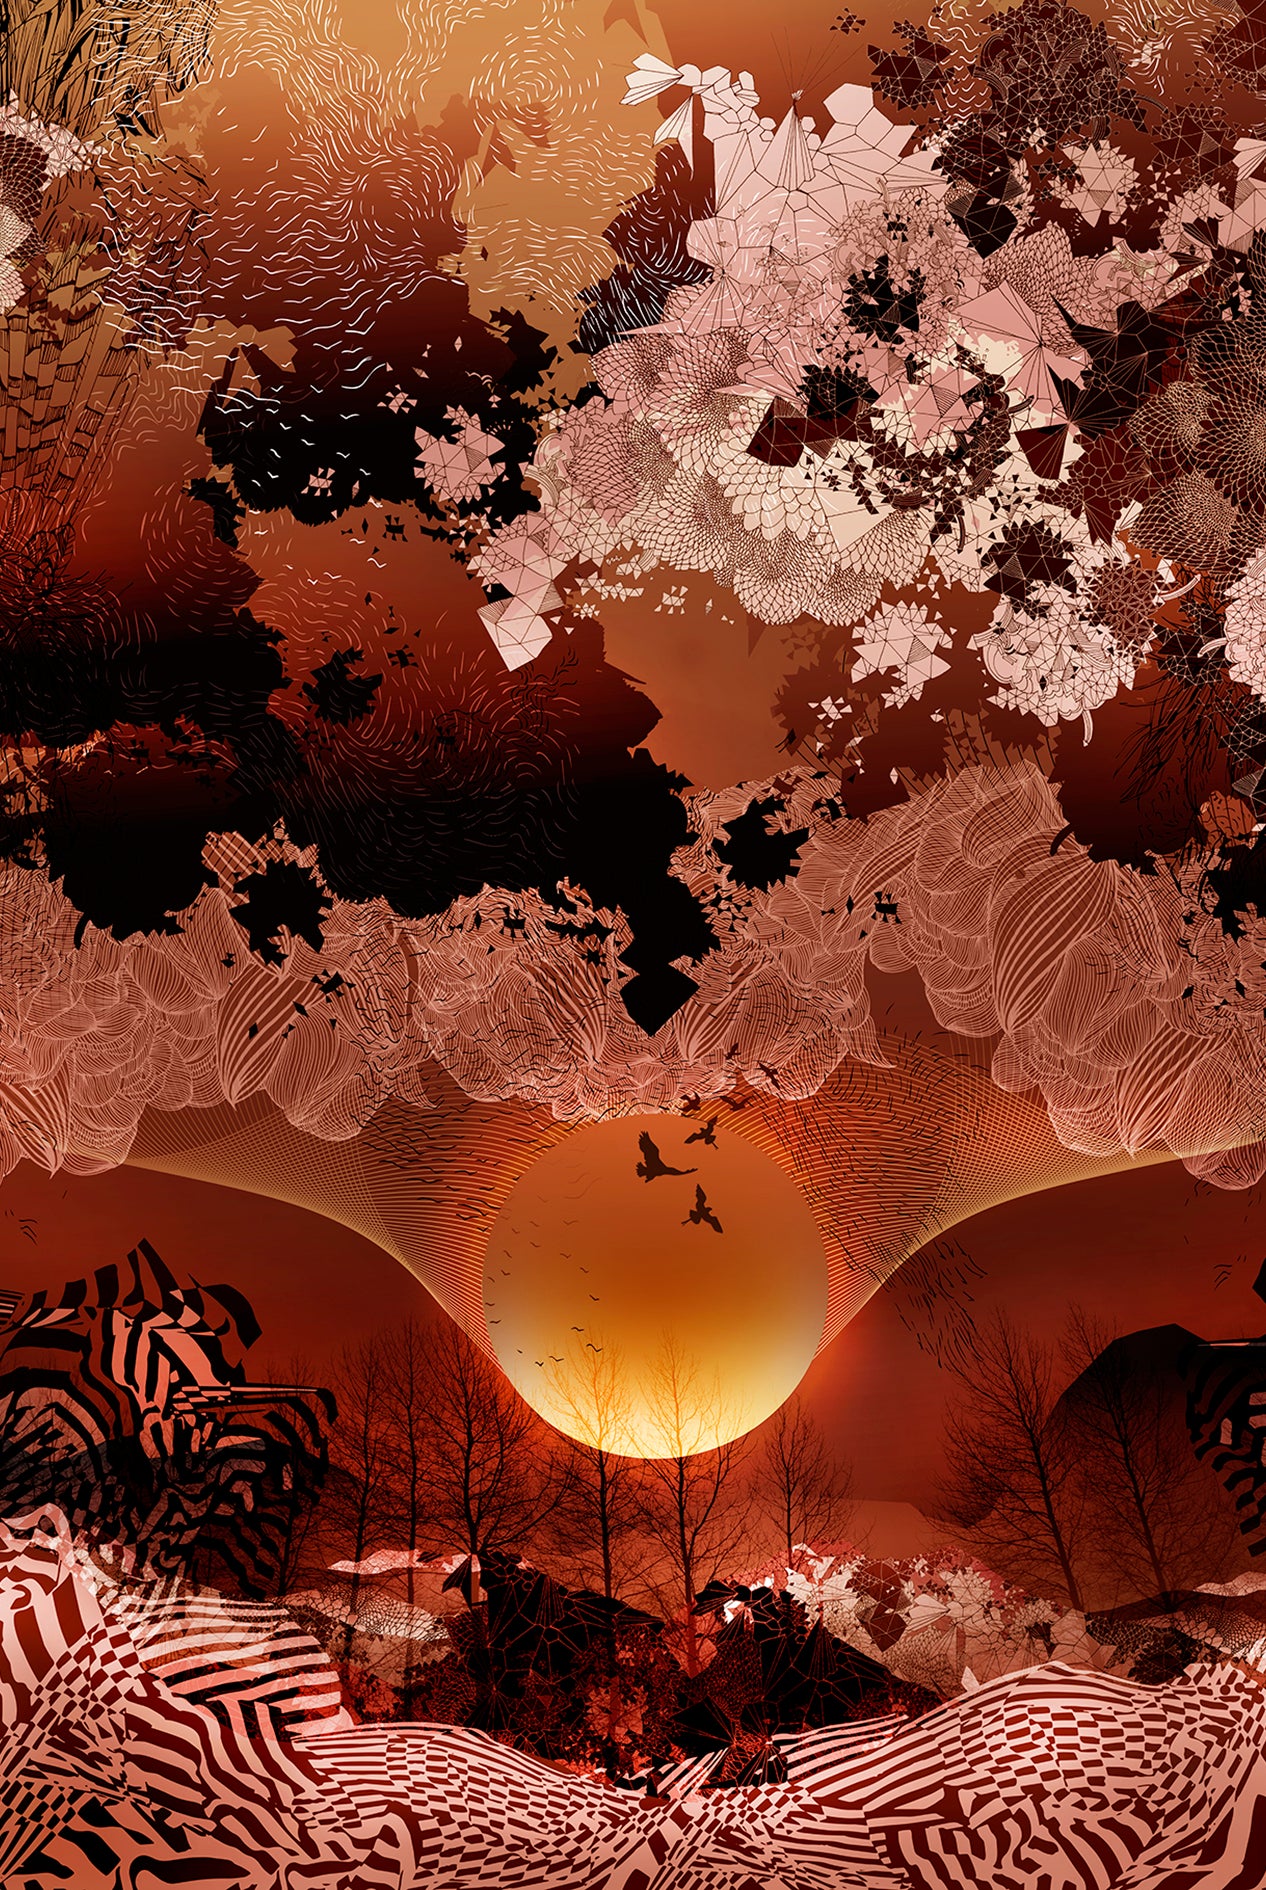 Full size print of Autumn Moon with deep reds and oranges, a sunset design and geometric patterns